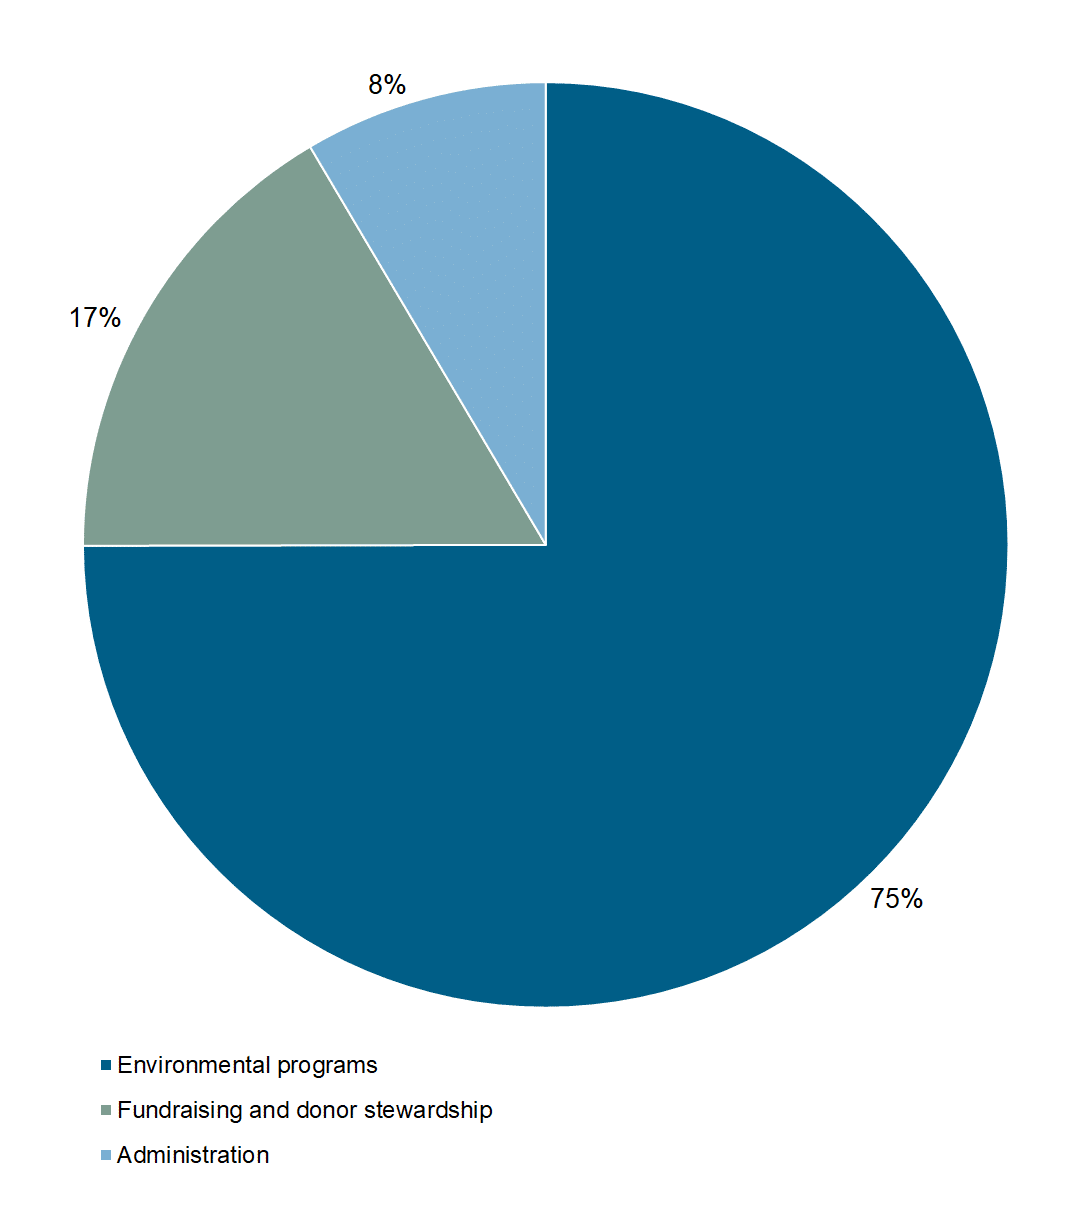 Pie chart indicating the percentage of donations by type of donor